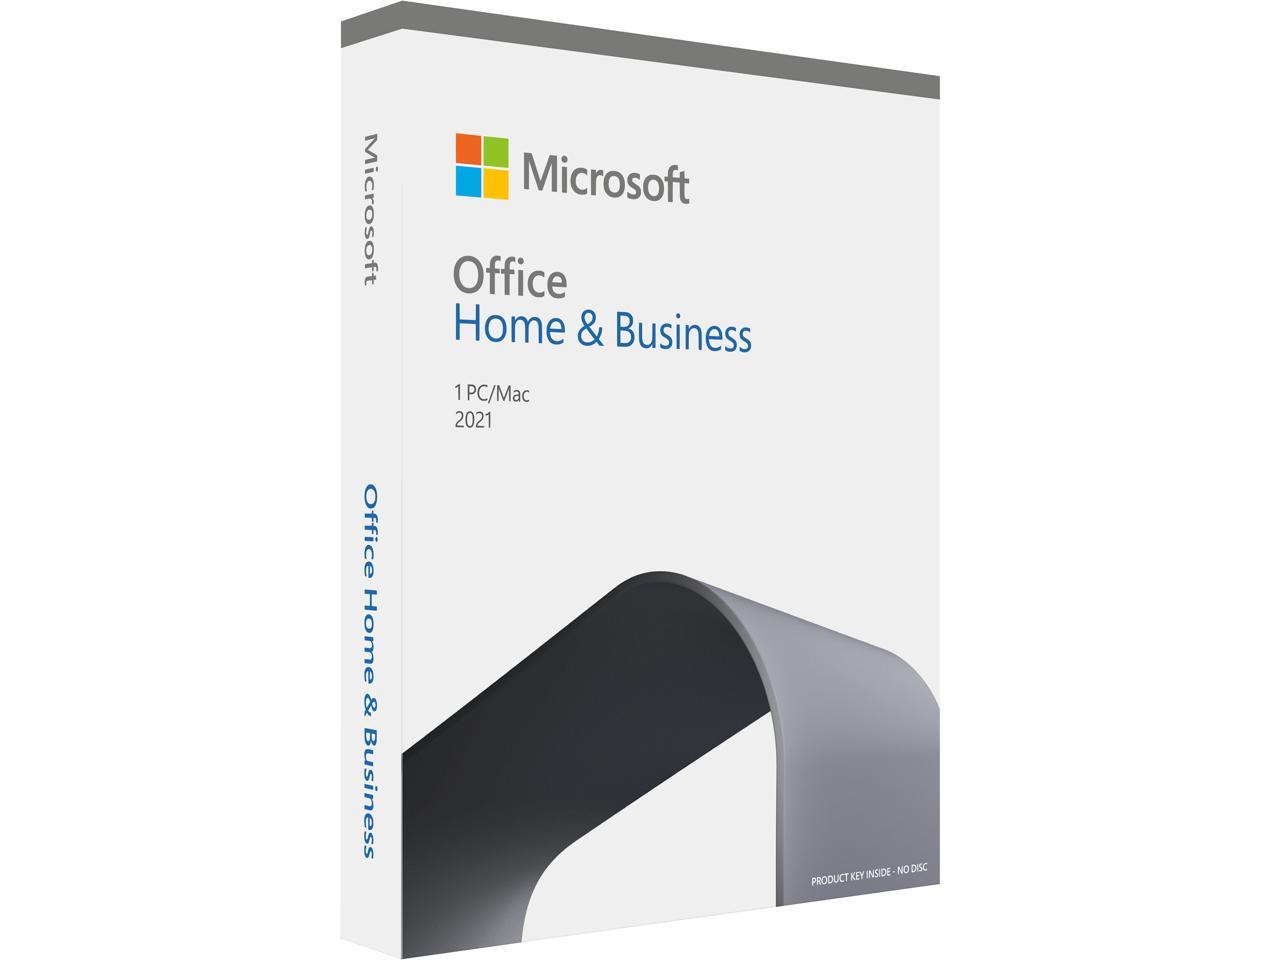 PC/タブレット PC周辺機器 Microsoft Office Home & Business 2021 | One Time Purchase, 1 Device |  Windows 10 PC/Mac Keycard